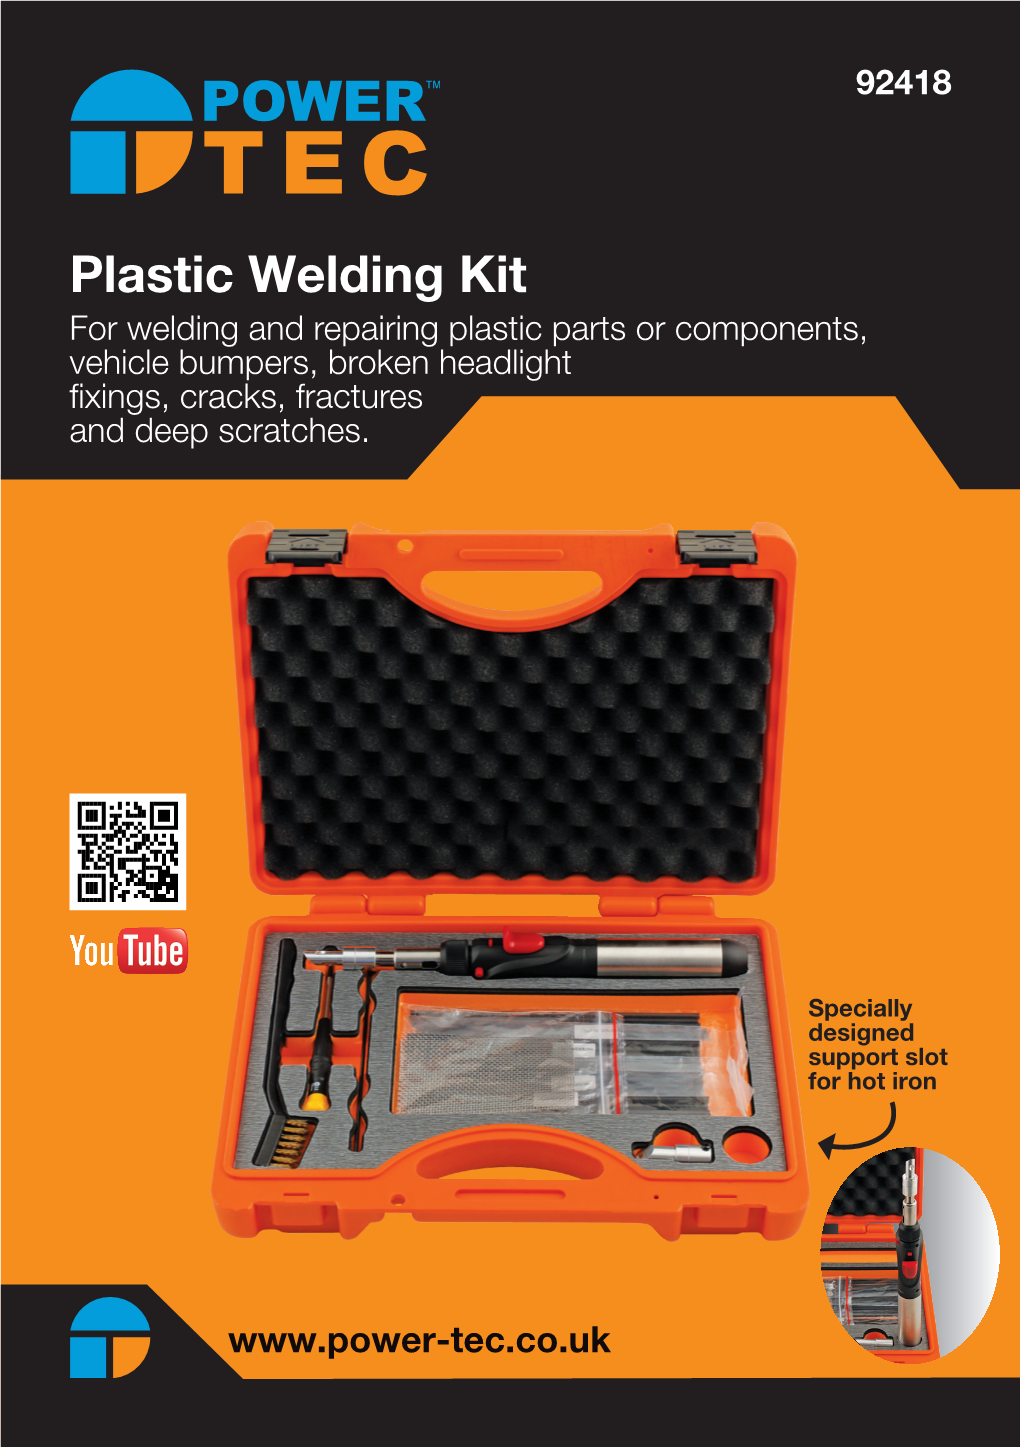 Plastic Welding Kit for Welding and Repairing Plastic Parts Or Components, Vehicle Bumpers, Broken Headlight Fixings, Cracks, Fractures and Deep Scratches